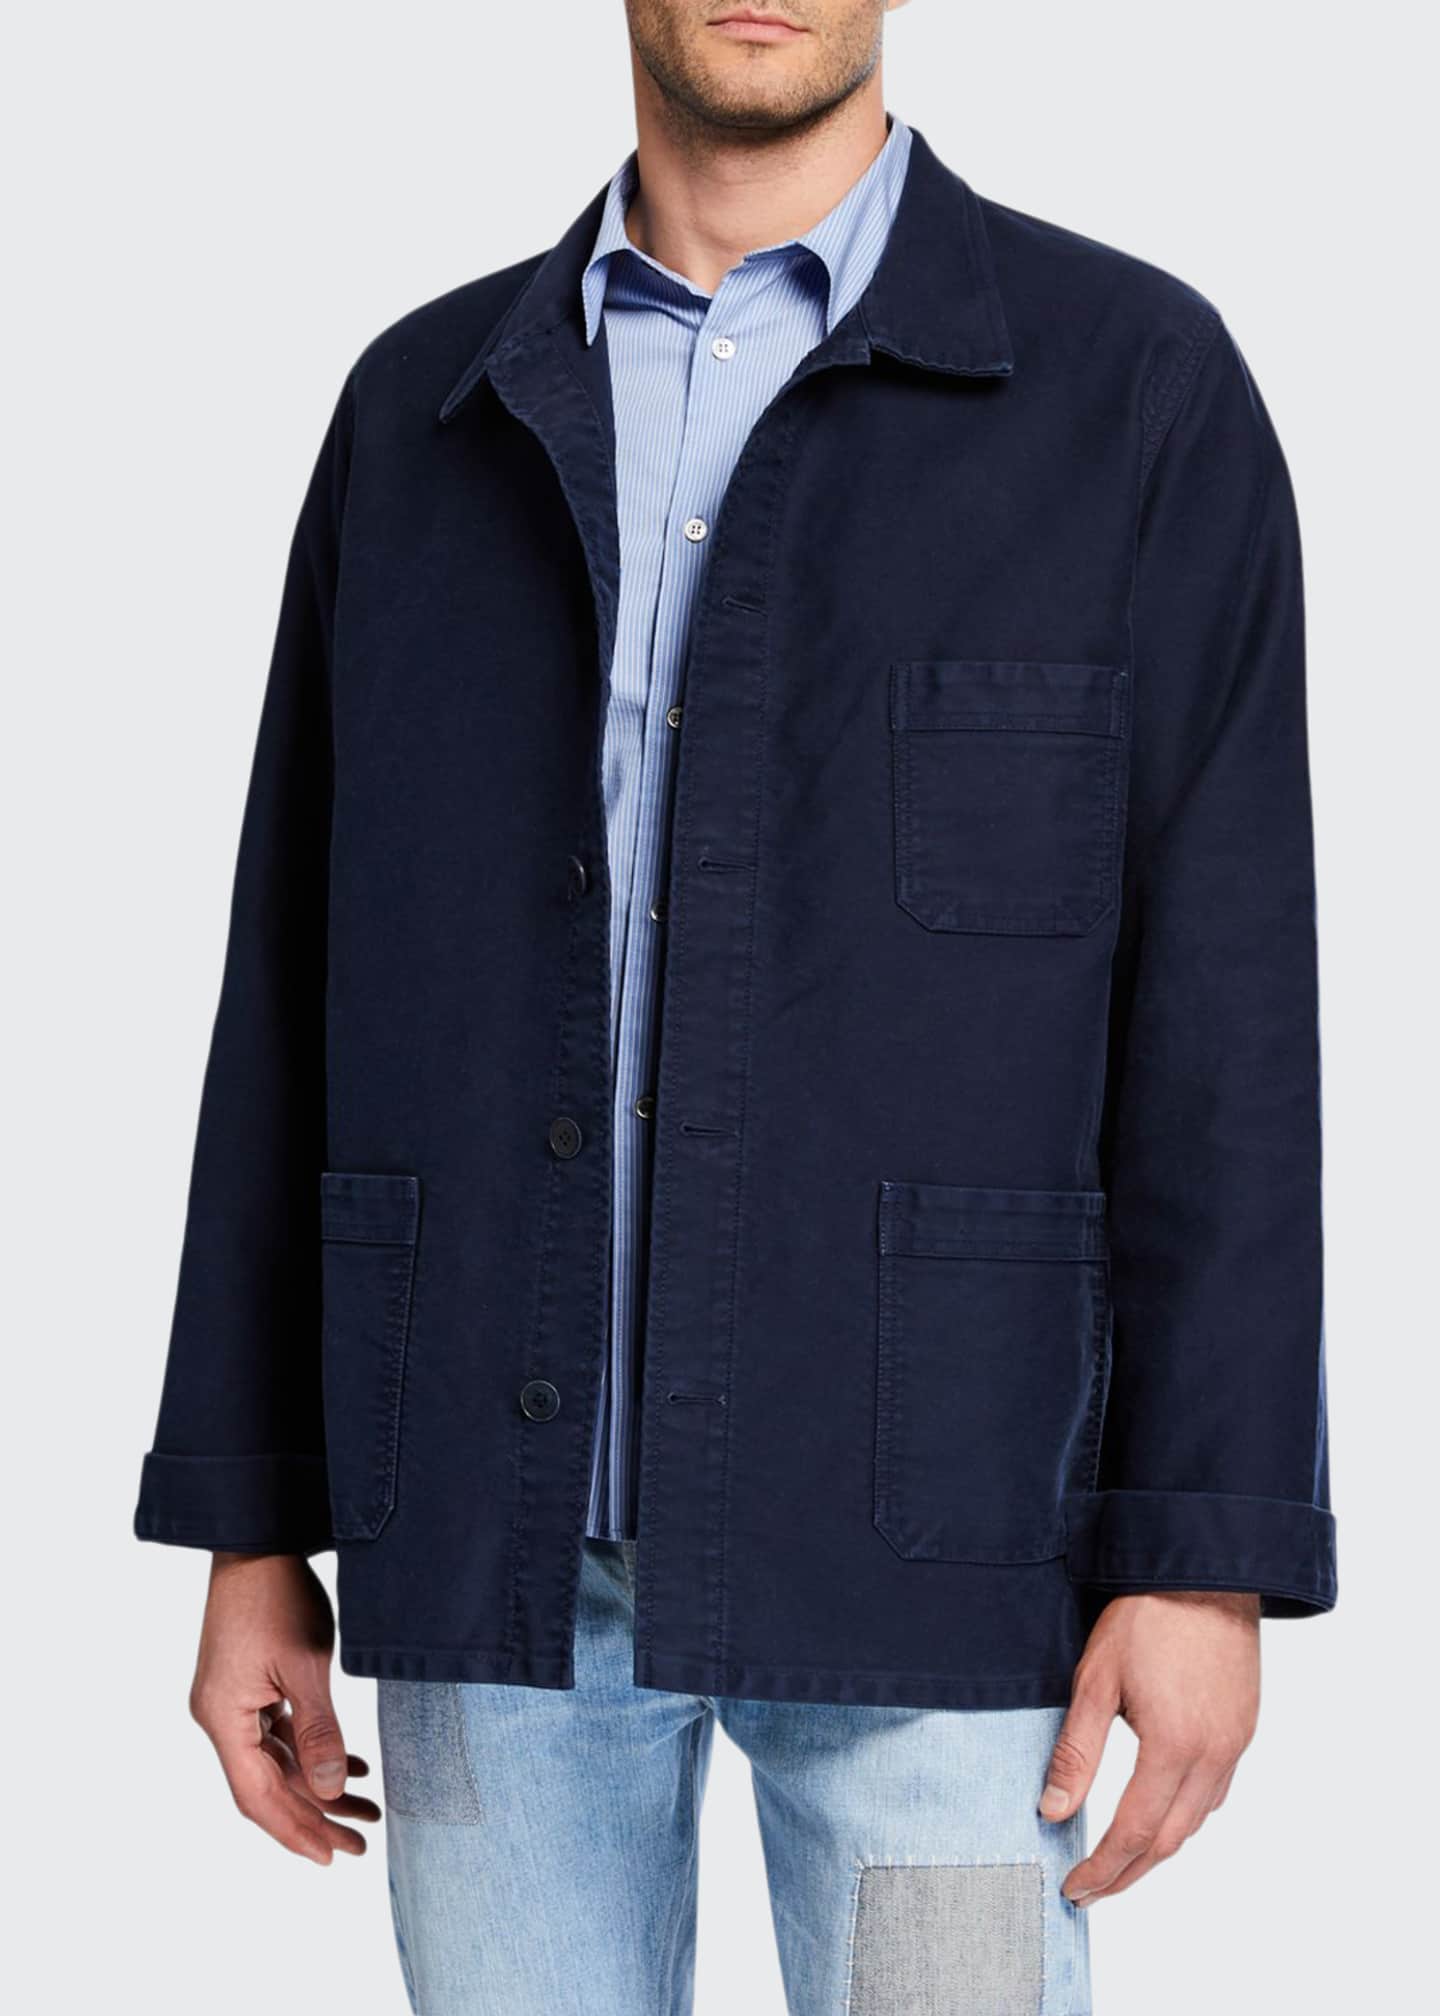 B. x Le Mont St. Michel Men's StoneWashed French Worker Jacket Bergdorf Goodman